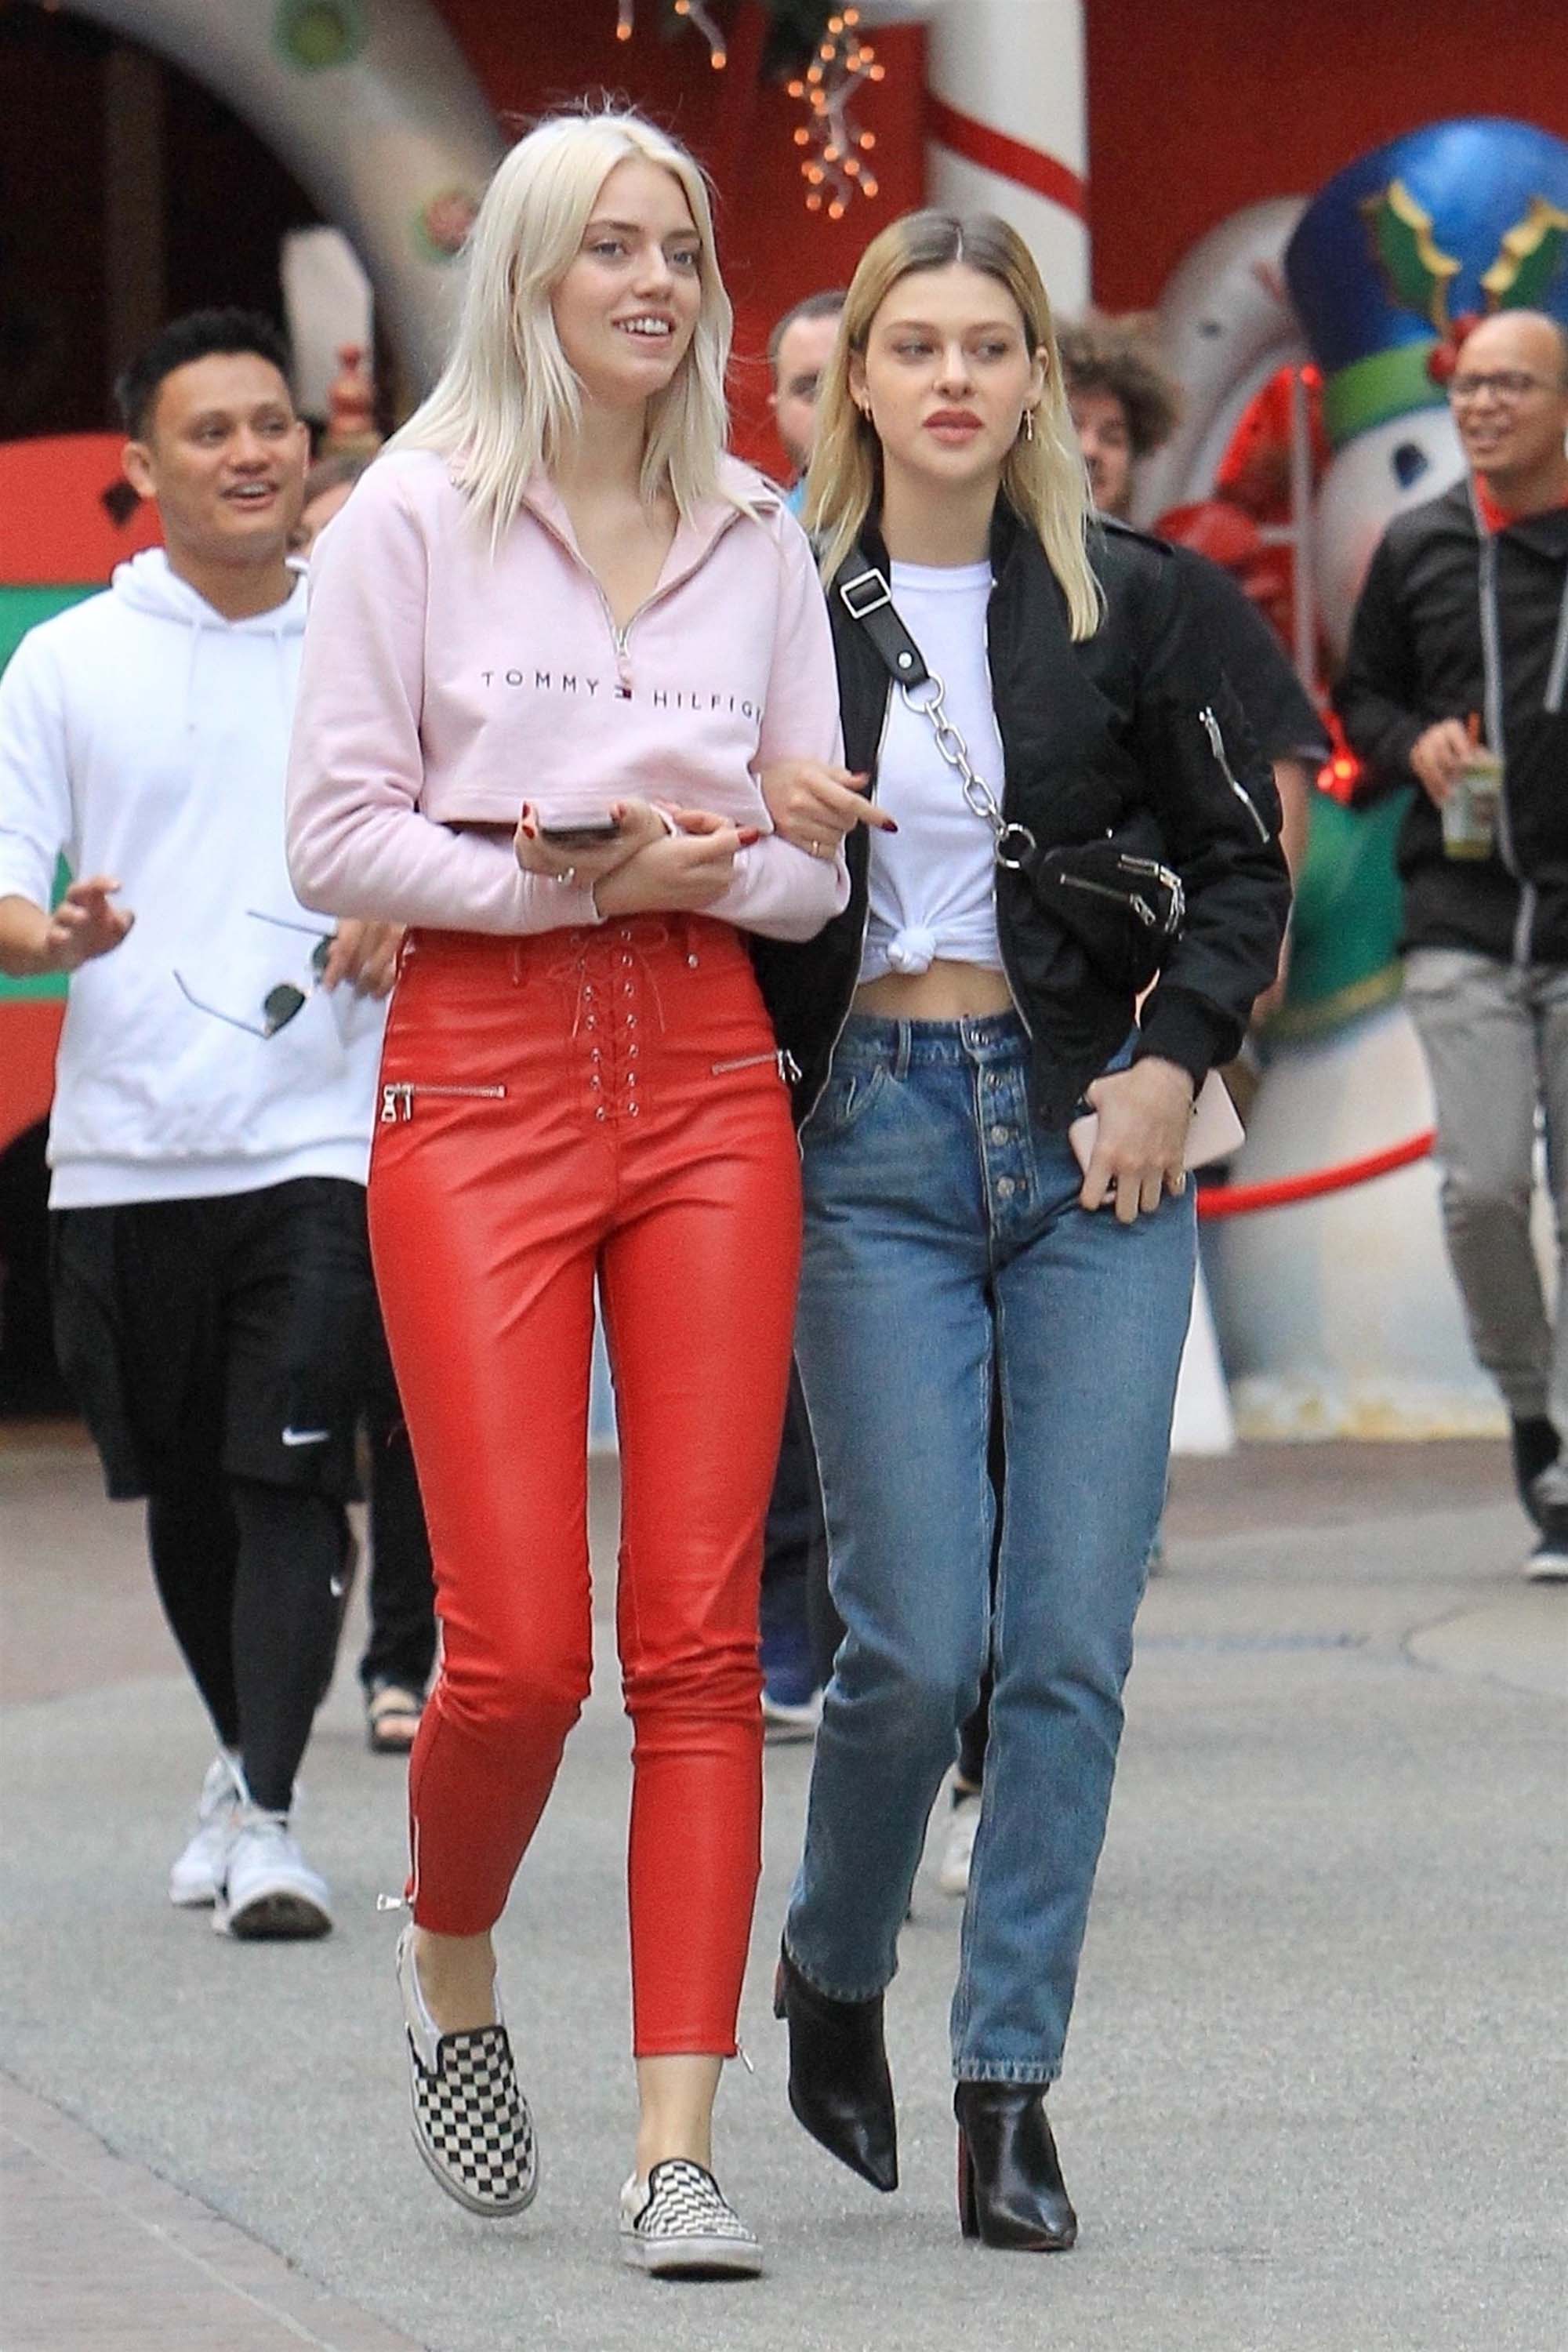 Nicola Peltz was spotted doing some shopping